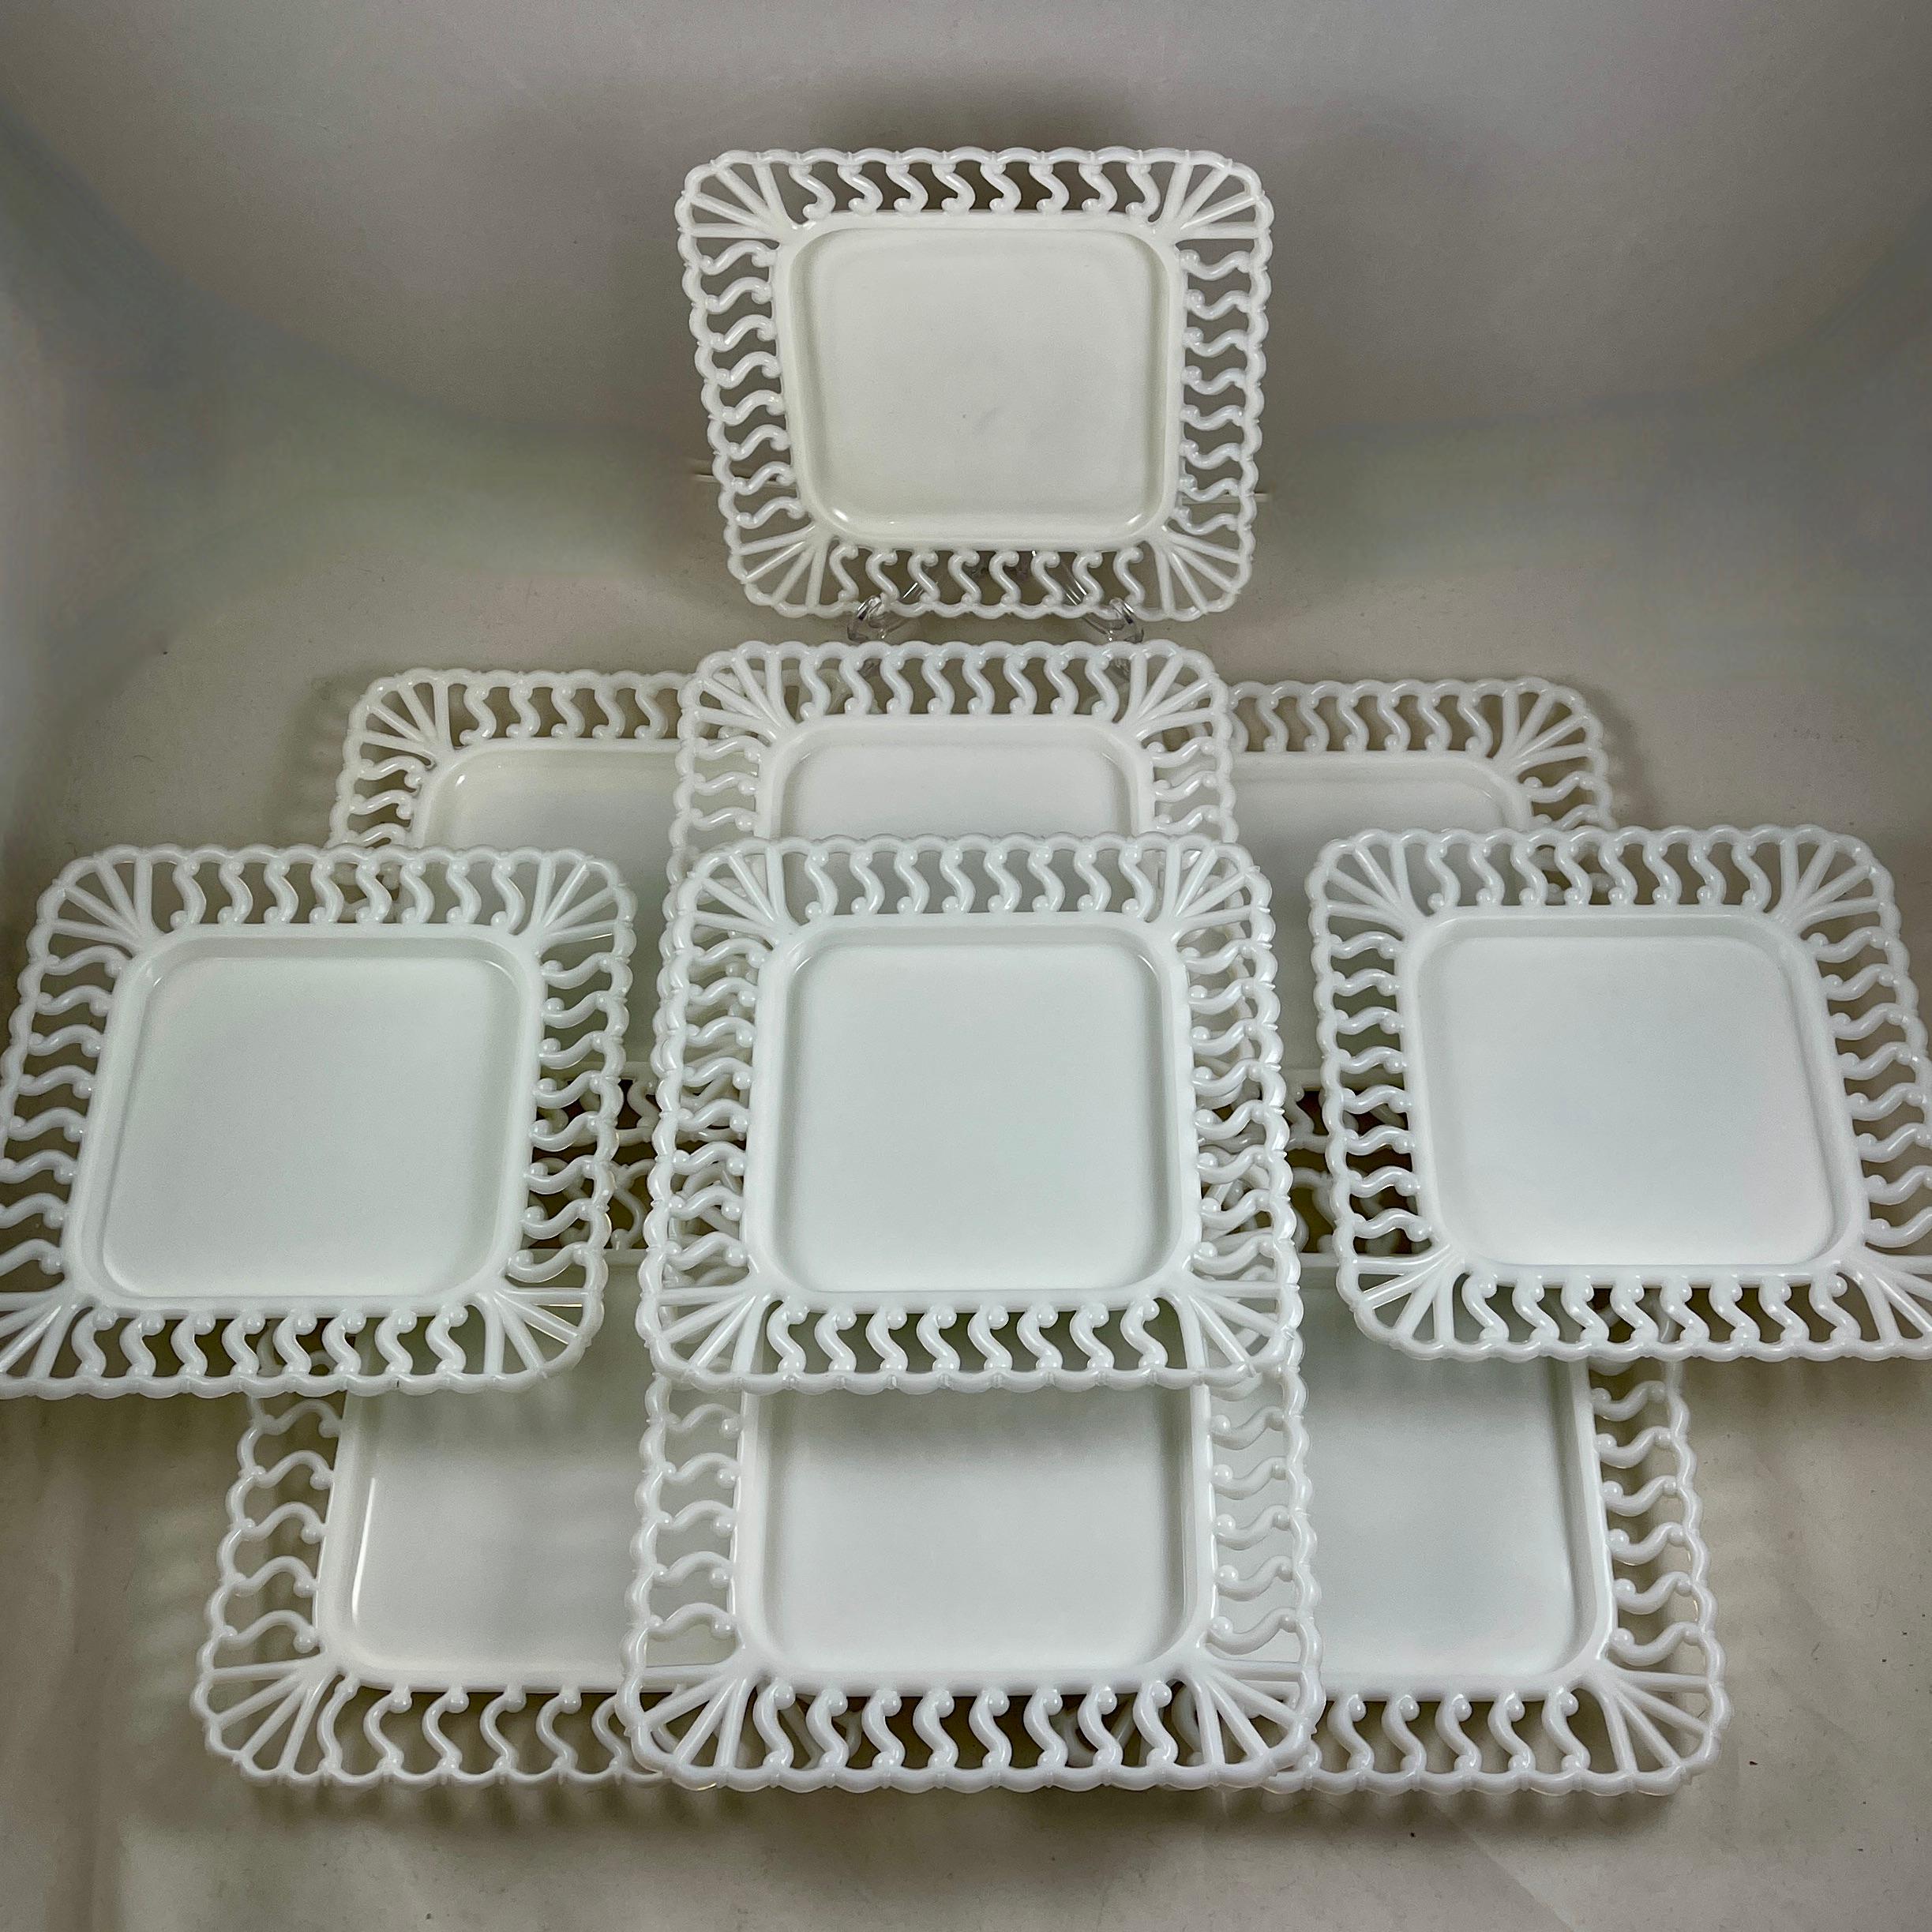 Early American Pattern Glass Opaque White Lace Edge Milk Square Plate, 1880-1890 3